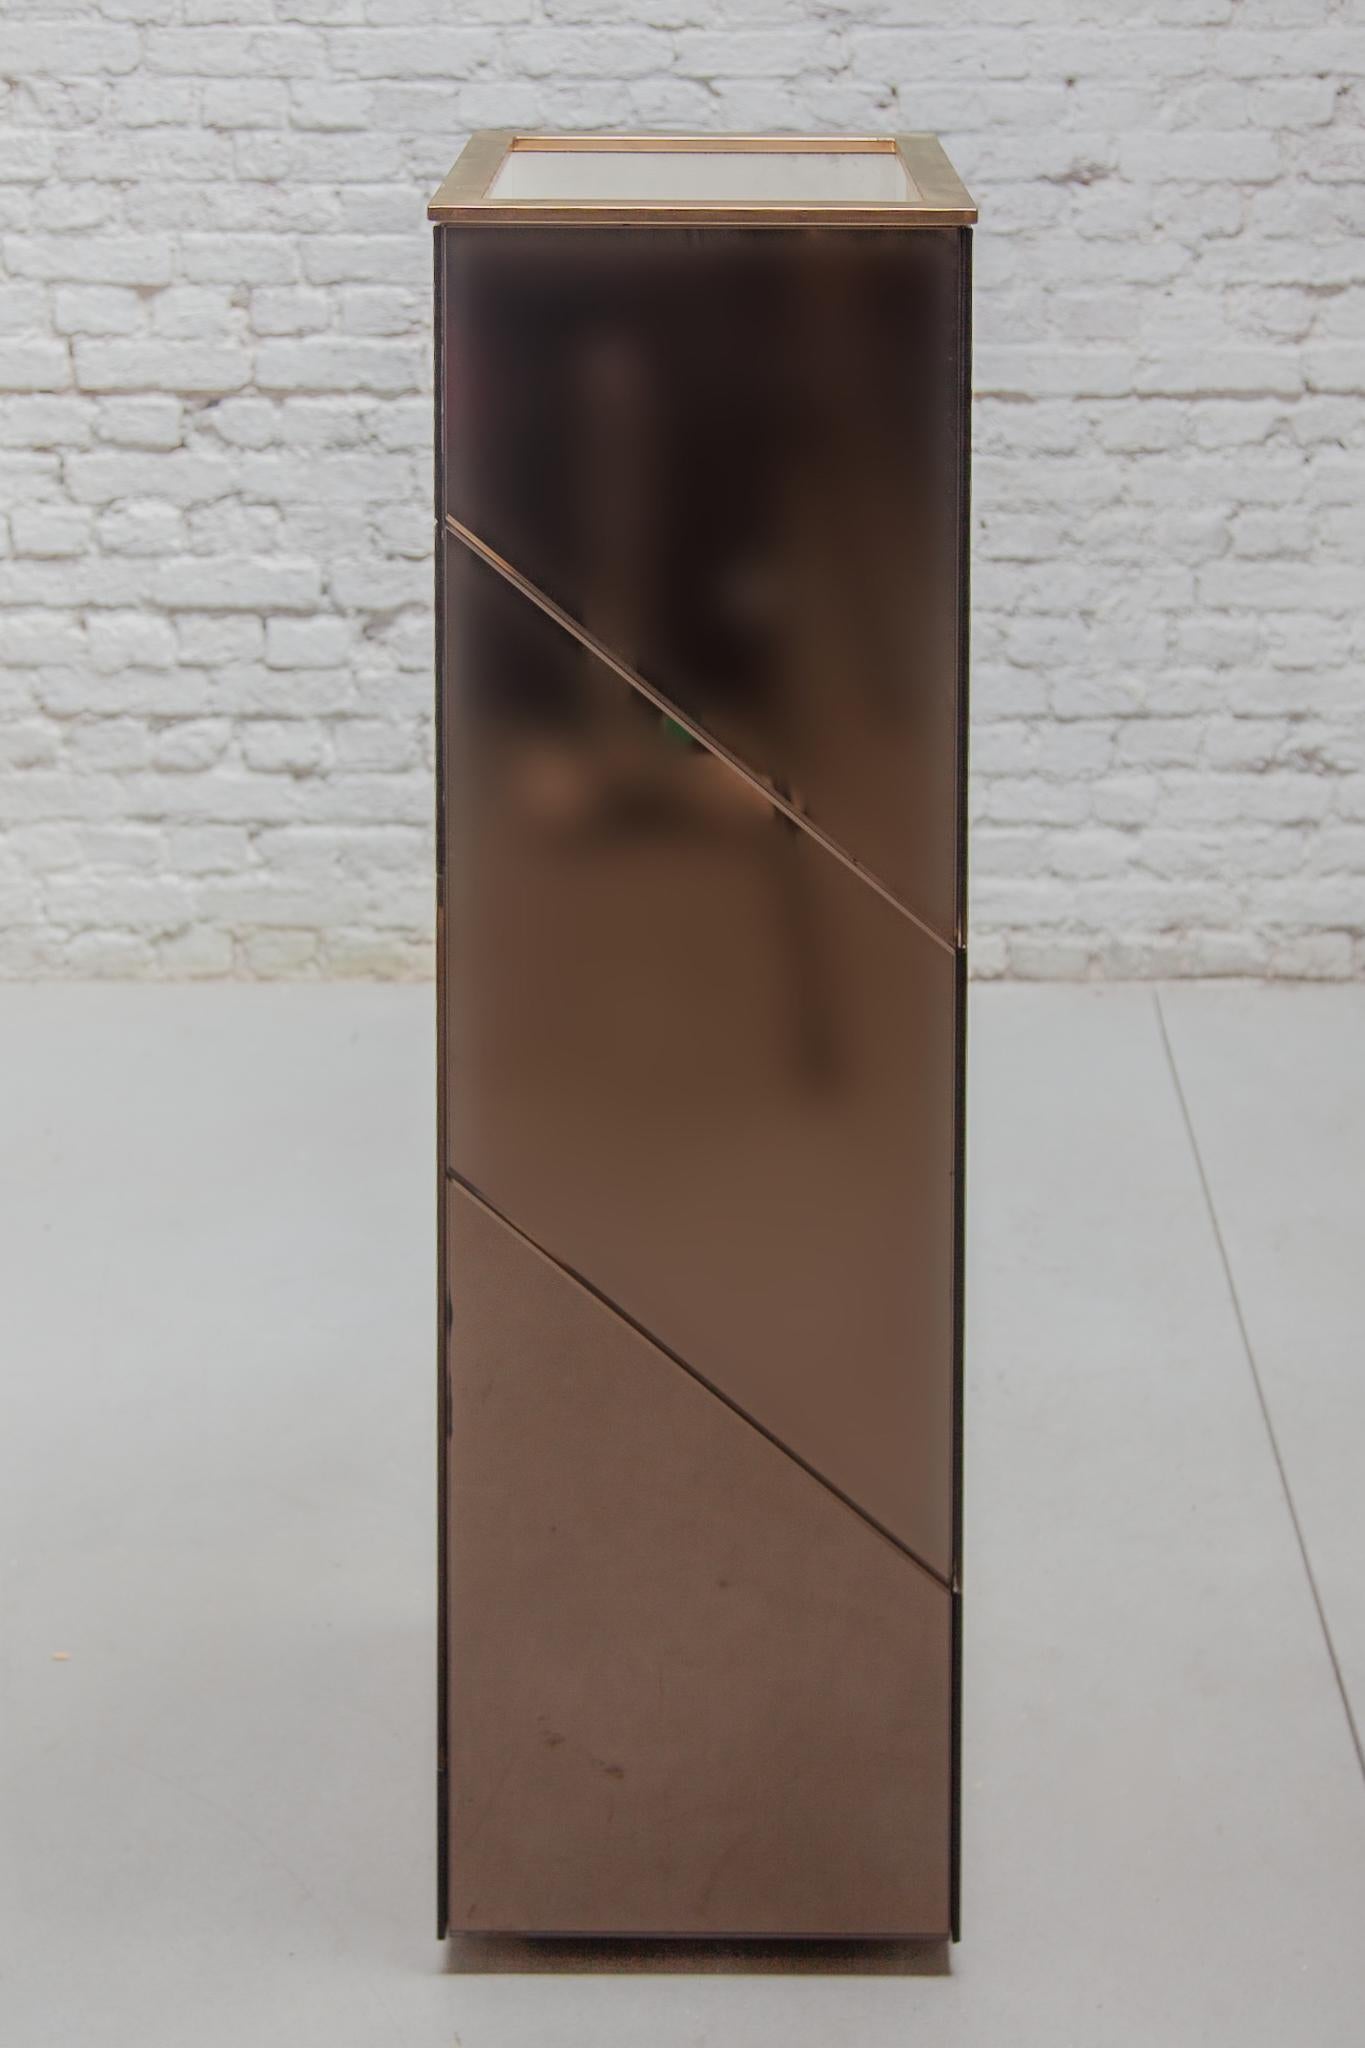 Smoked Mirrored Planter, Floor Lamp 1970s designed by Belgo chrome In Good Condition For Sale In Antwerp, BE